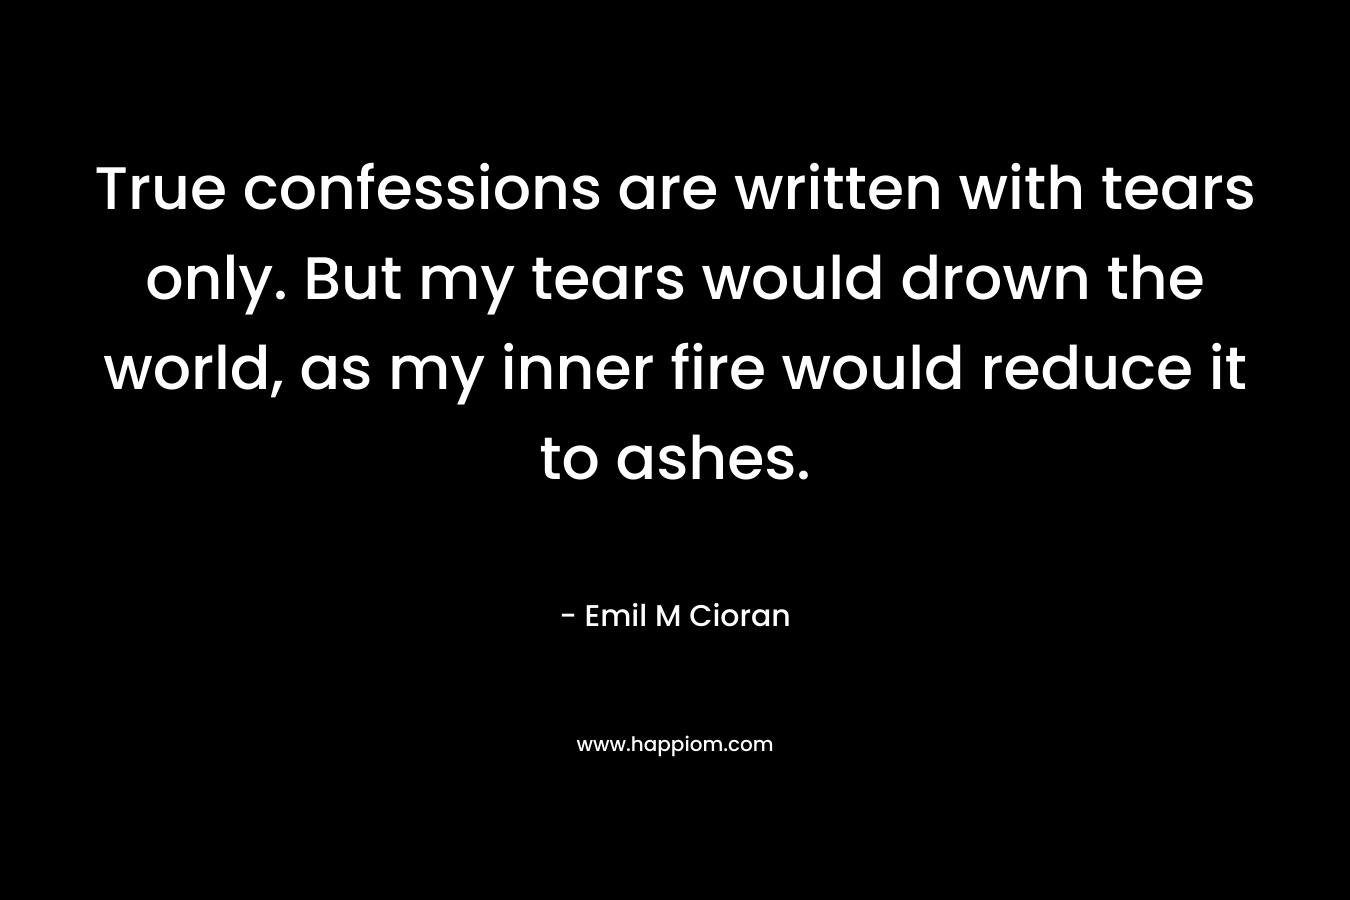 True confessions are written with tears only. But my tears would drown the world, as my inner fire would reduce it to ashes.